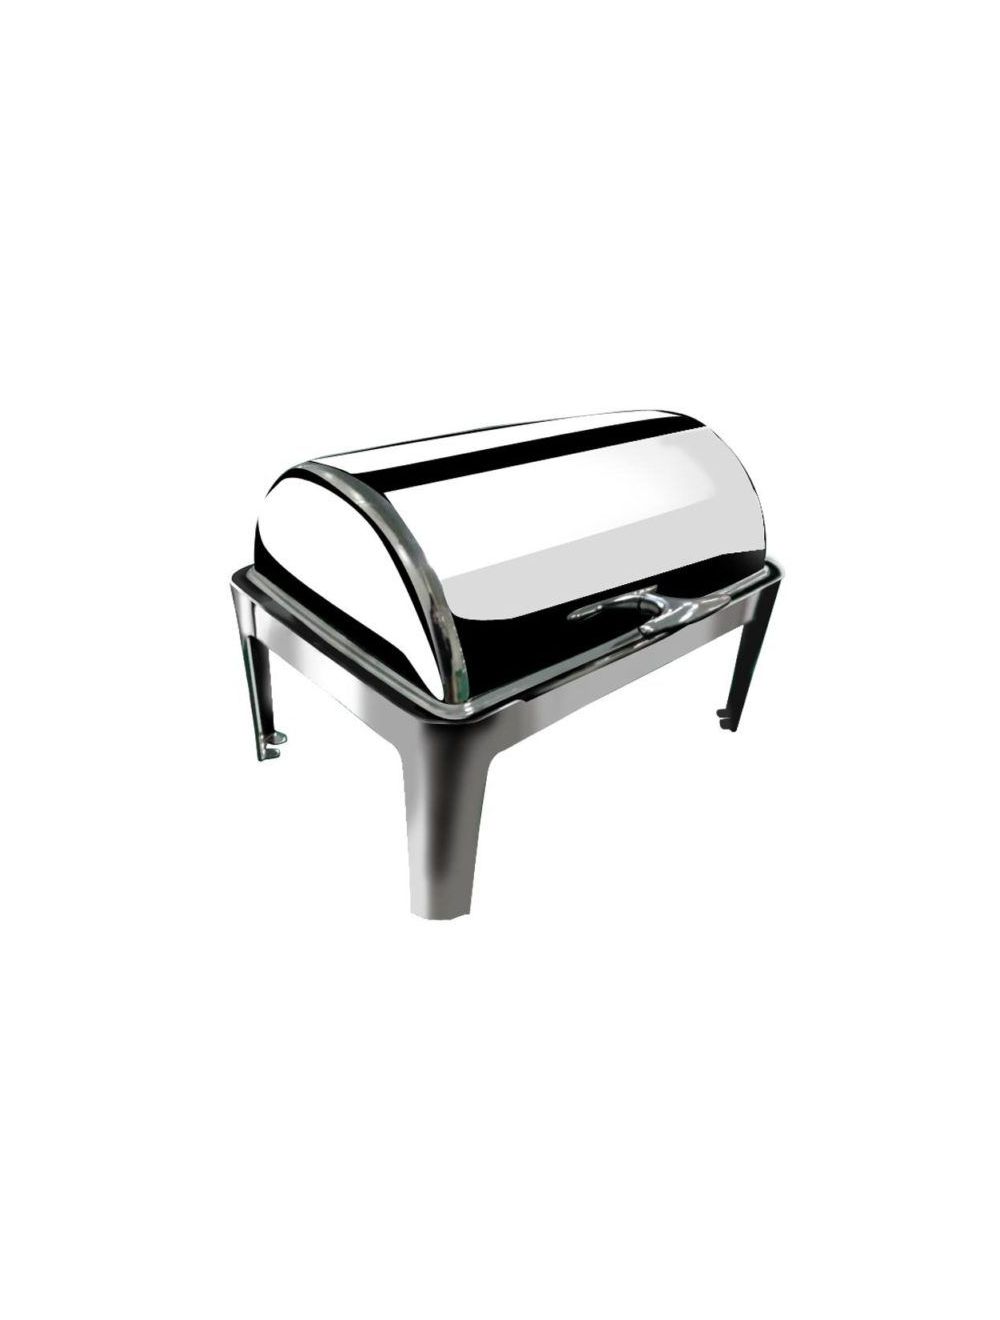 Chefset Hydraulic Chafing Dish Roll Top